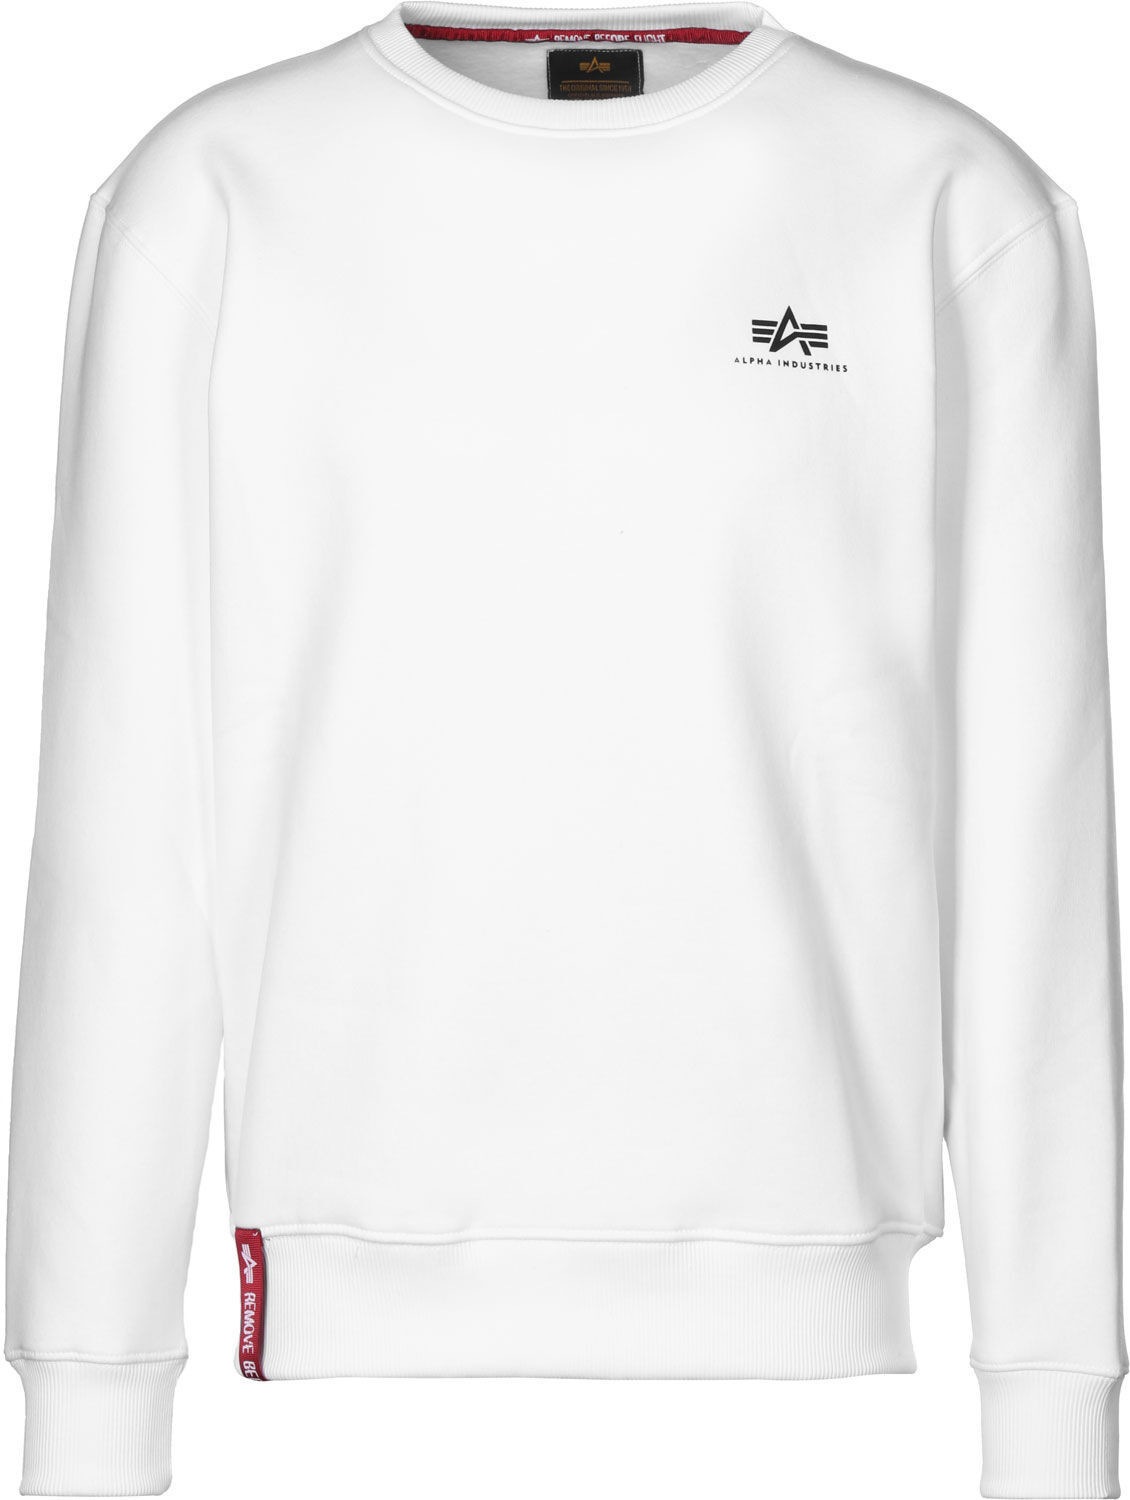 Alpha Industries Basic 515 White Sweater The - Logo - (188307/09) Small